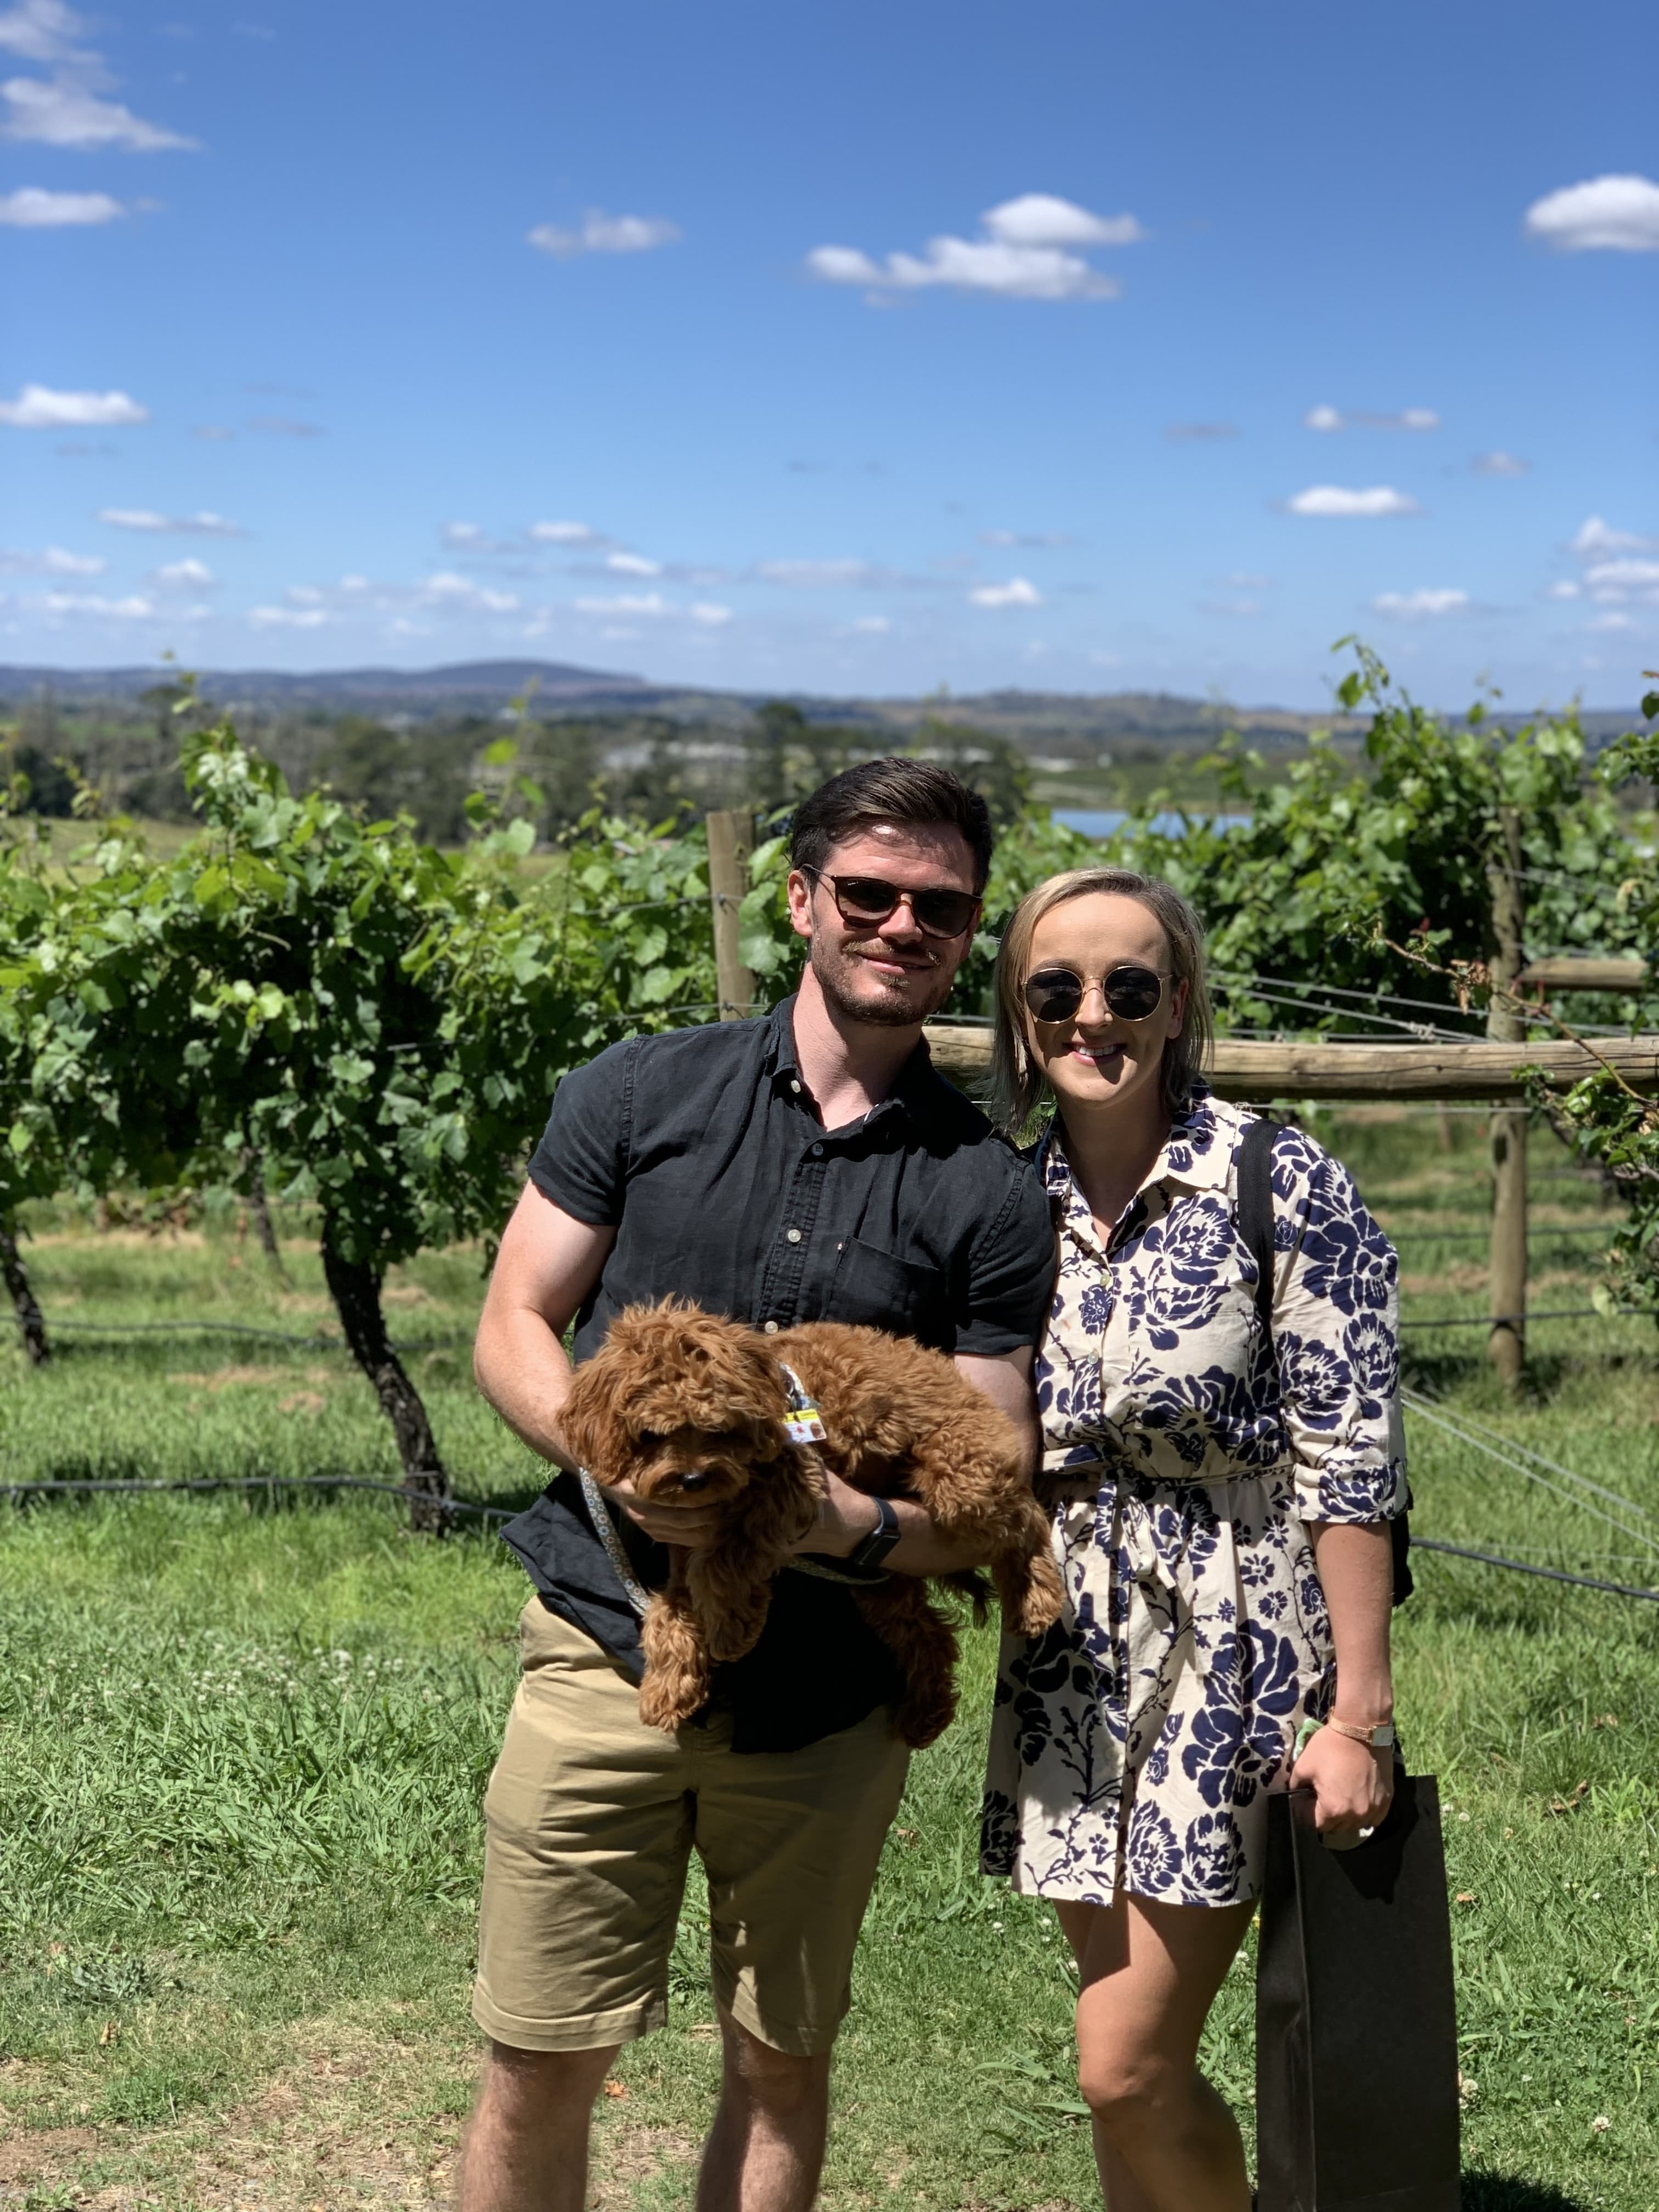 lady and man standing in front of vineyard holding small dog